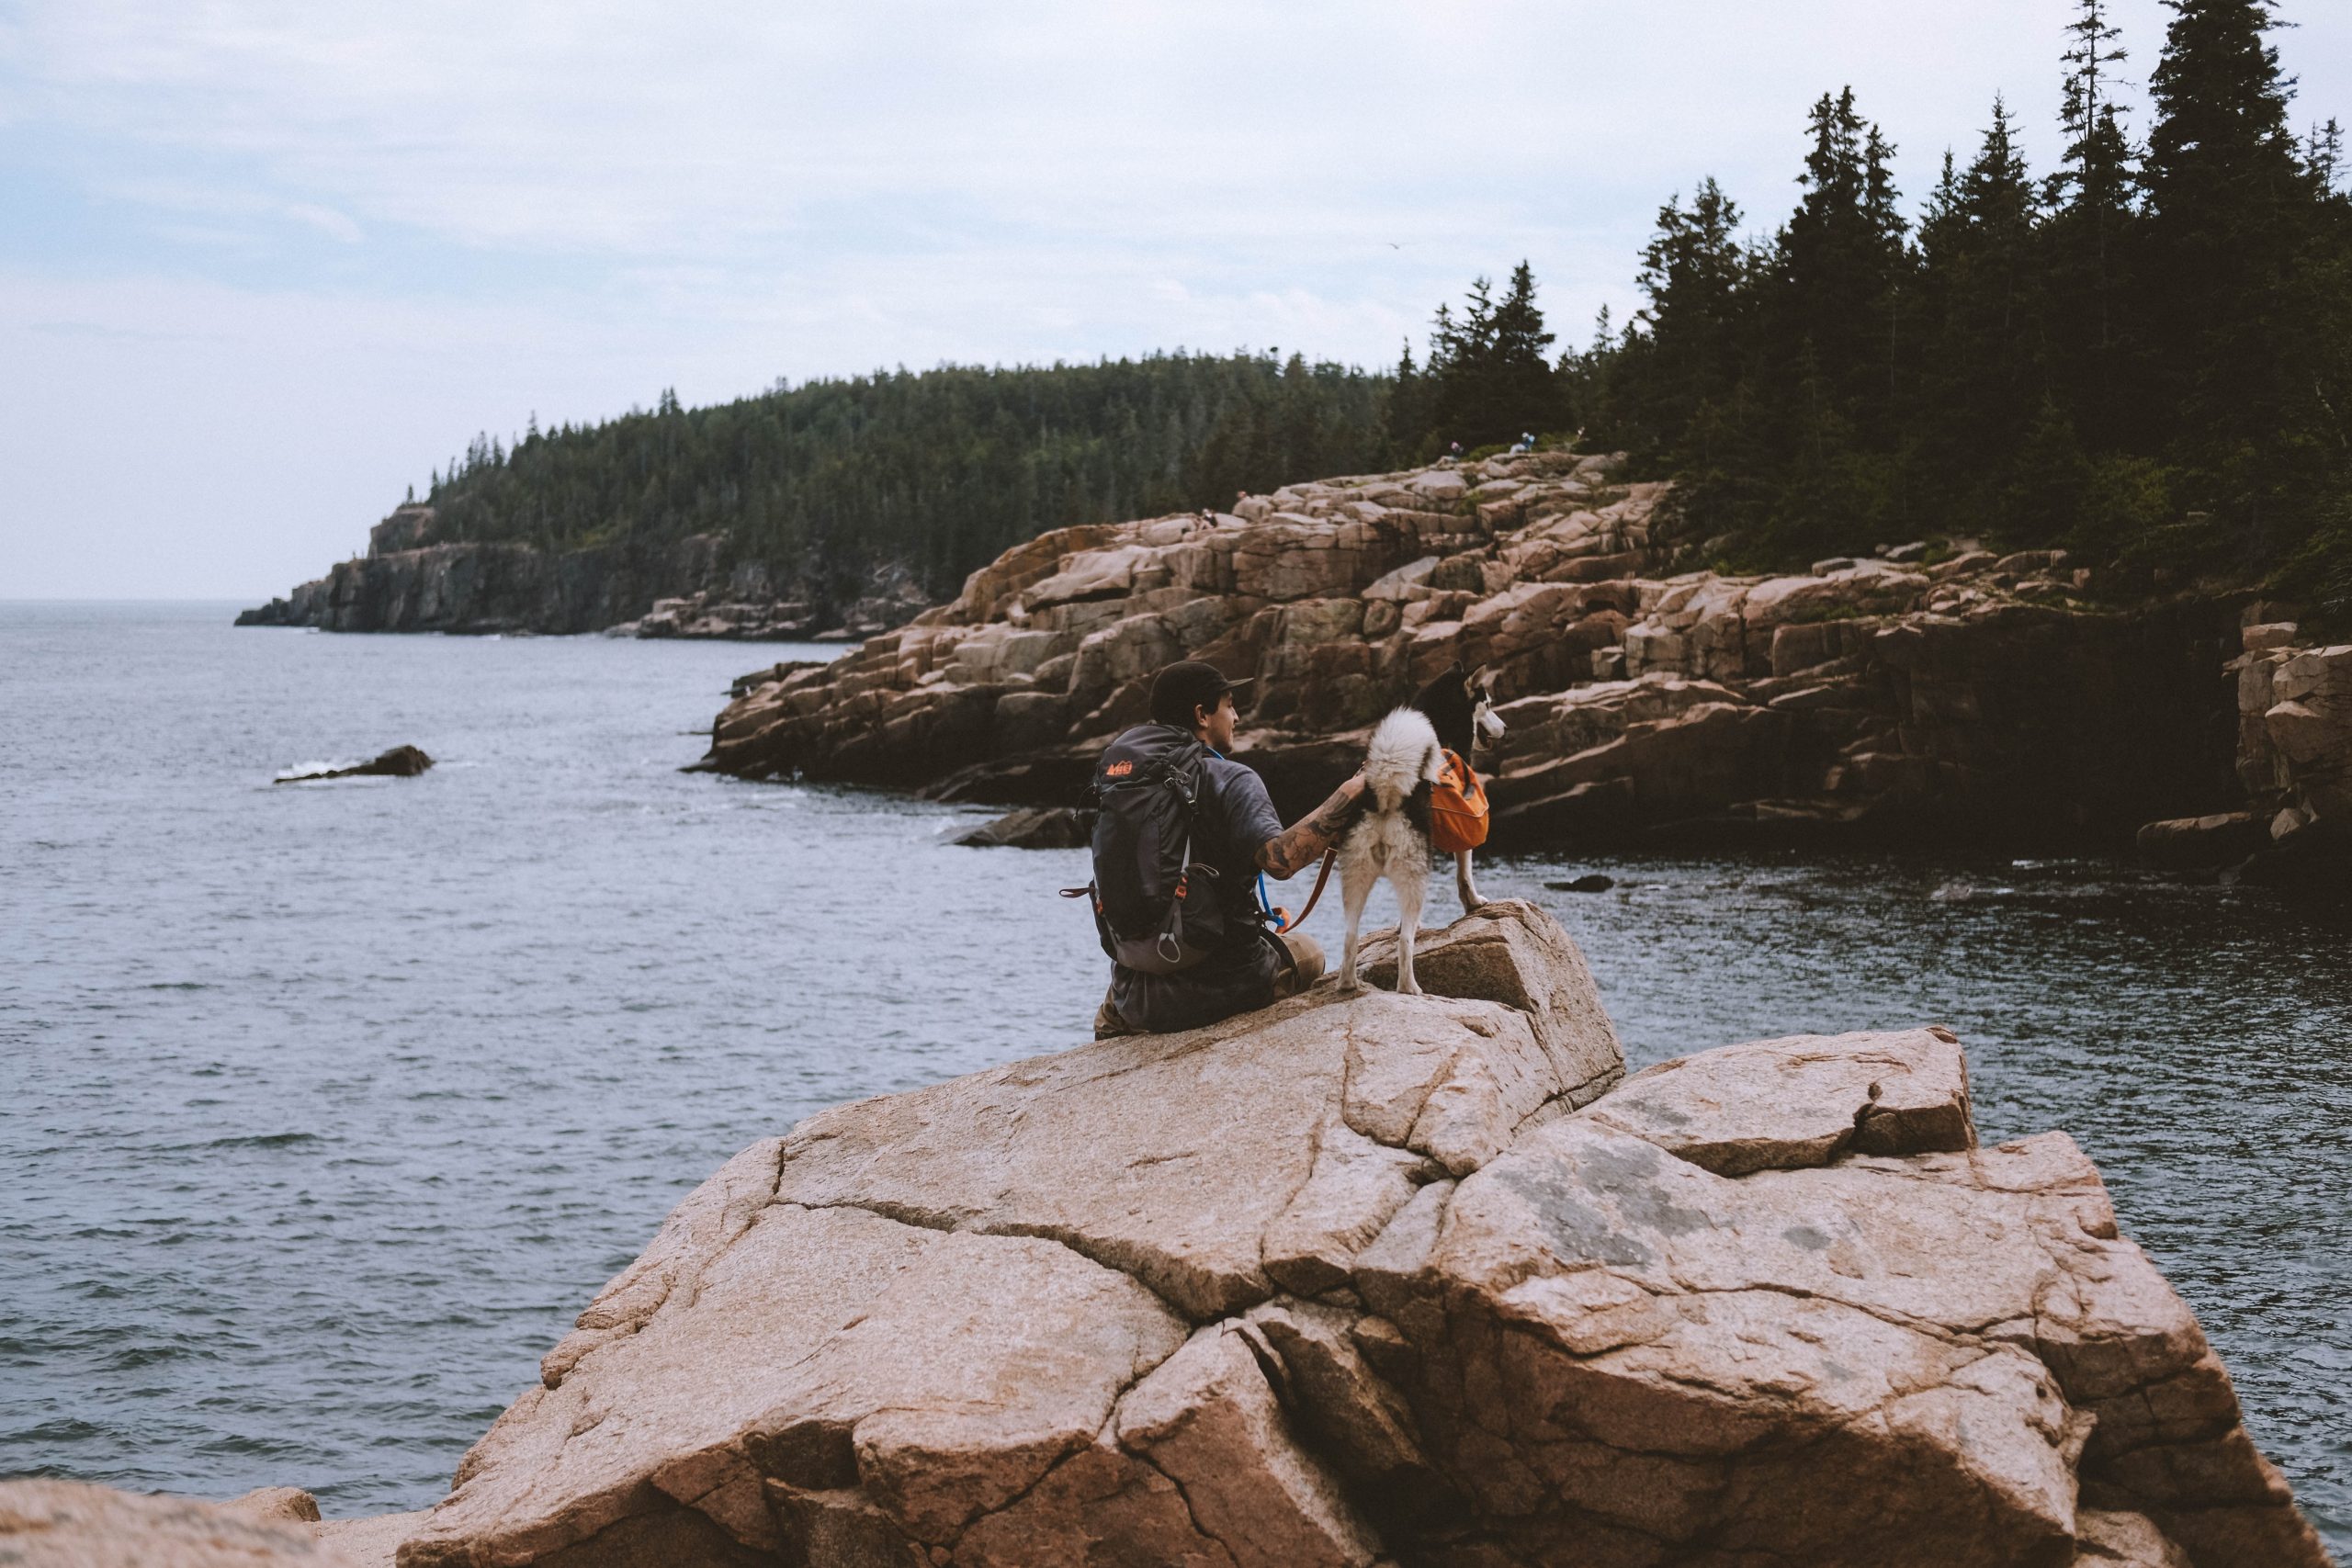 A man and his dog on a rock staring at the ocean.